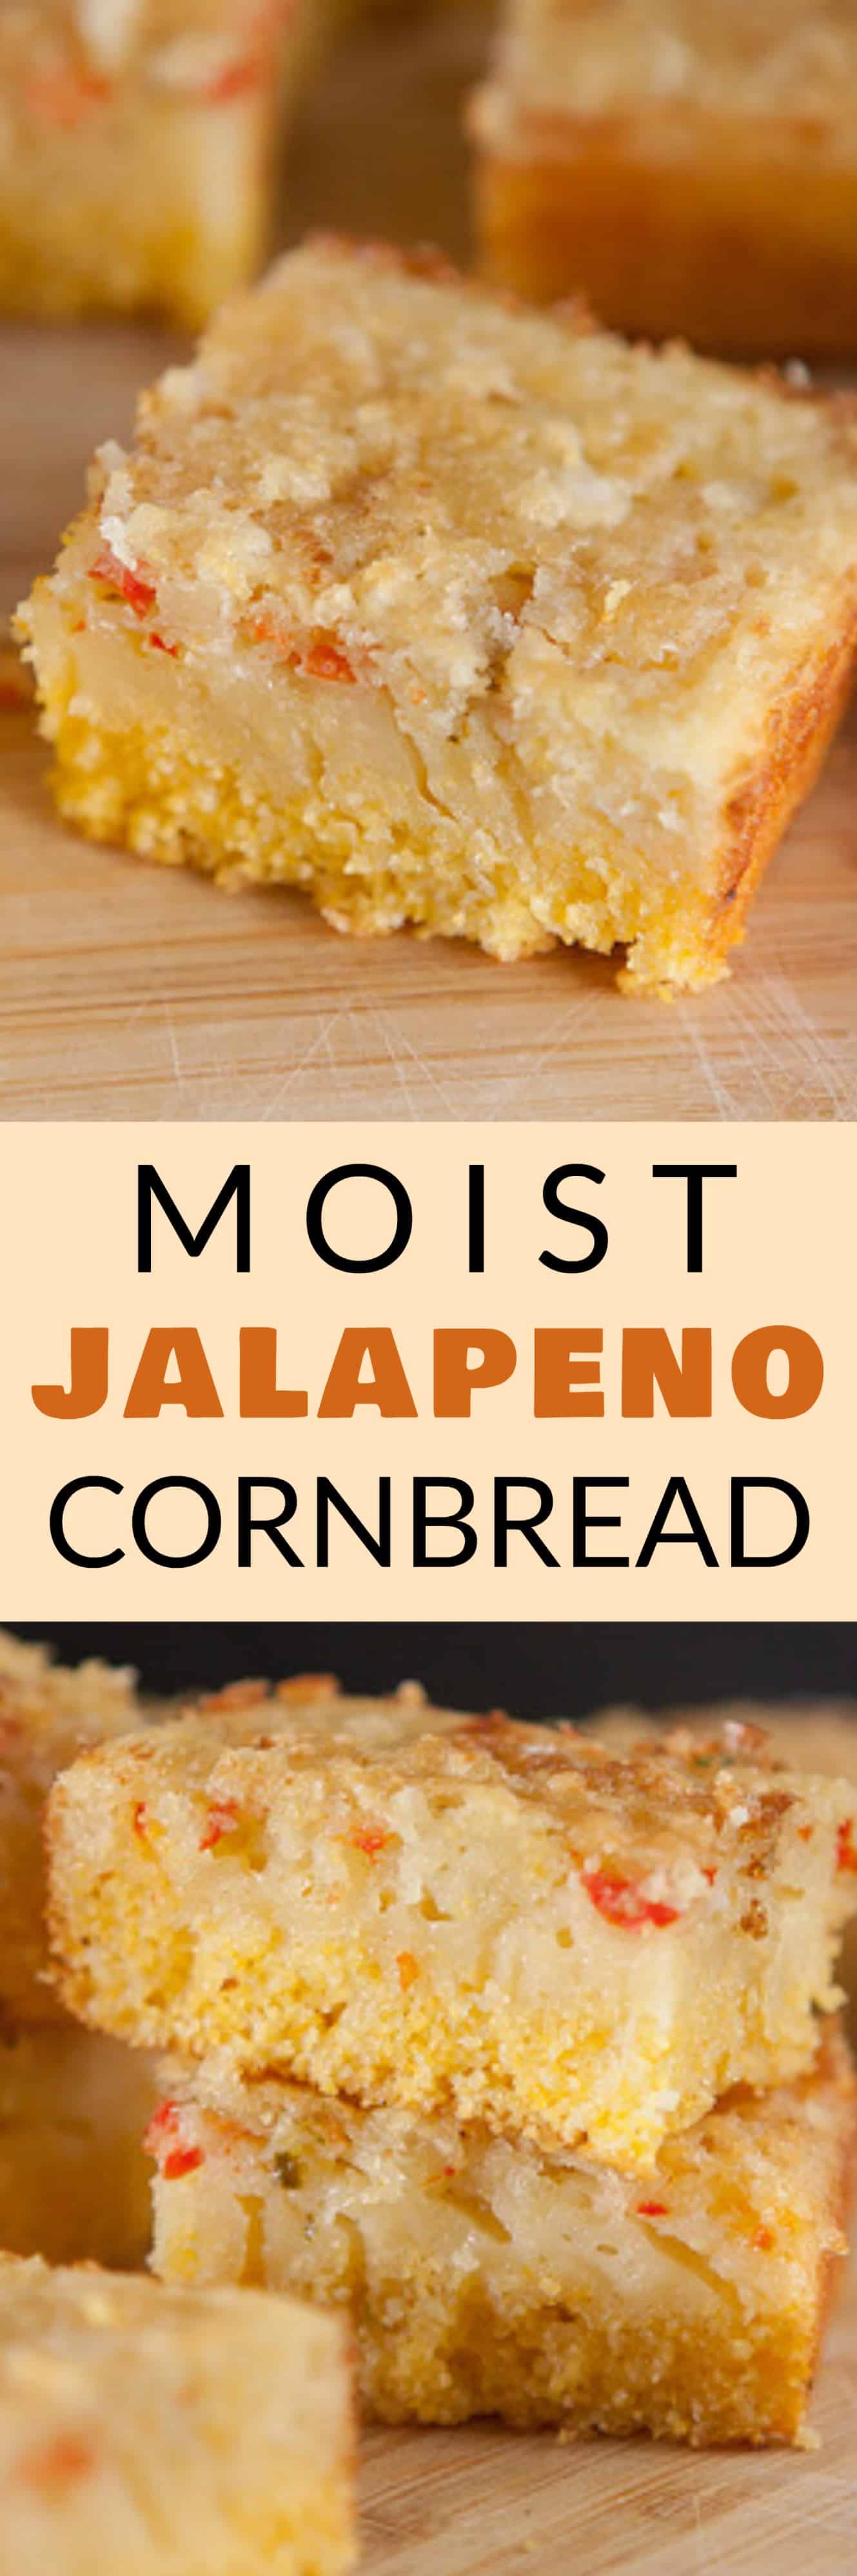 EASY, MOIST Jalapeno Cornbread! This Southern recipe uses buttermilk to make the cornbread extra soft! The Jalapenos give it a little Mexican taste! I always serve homemade cornbread with dinner casseroles!